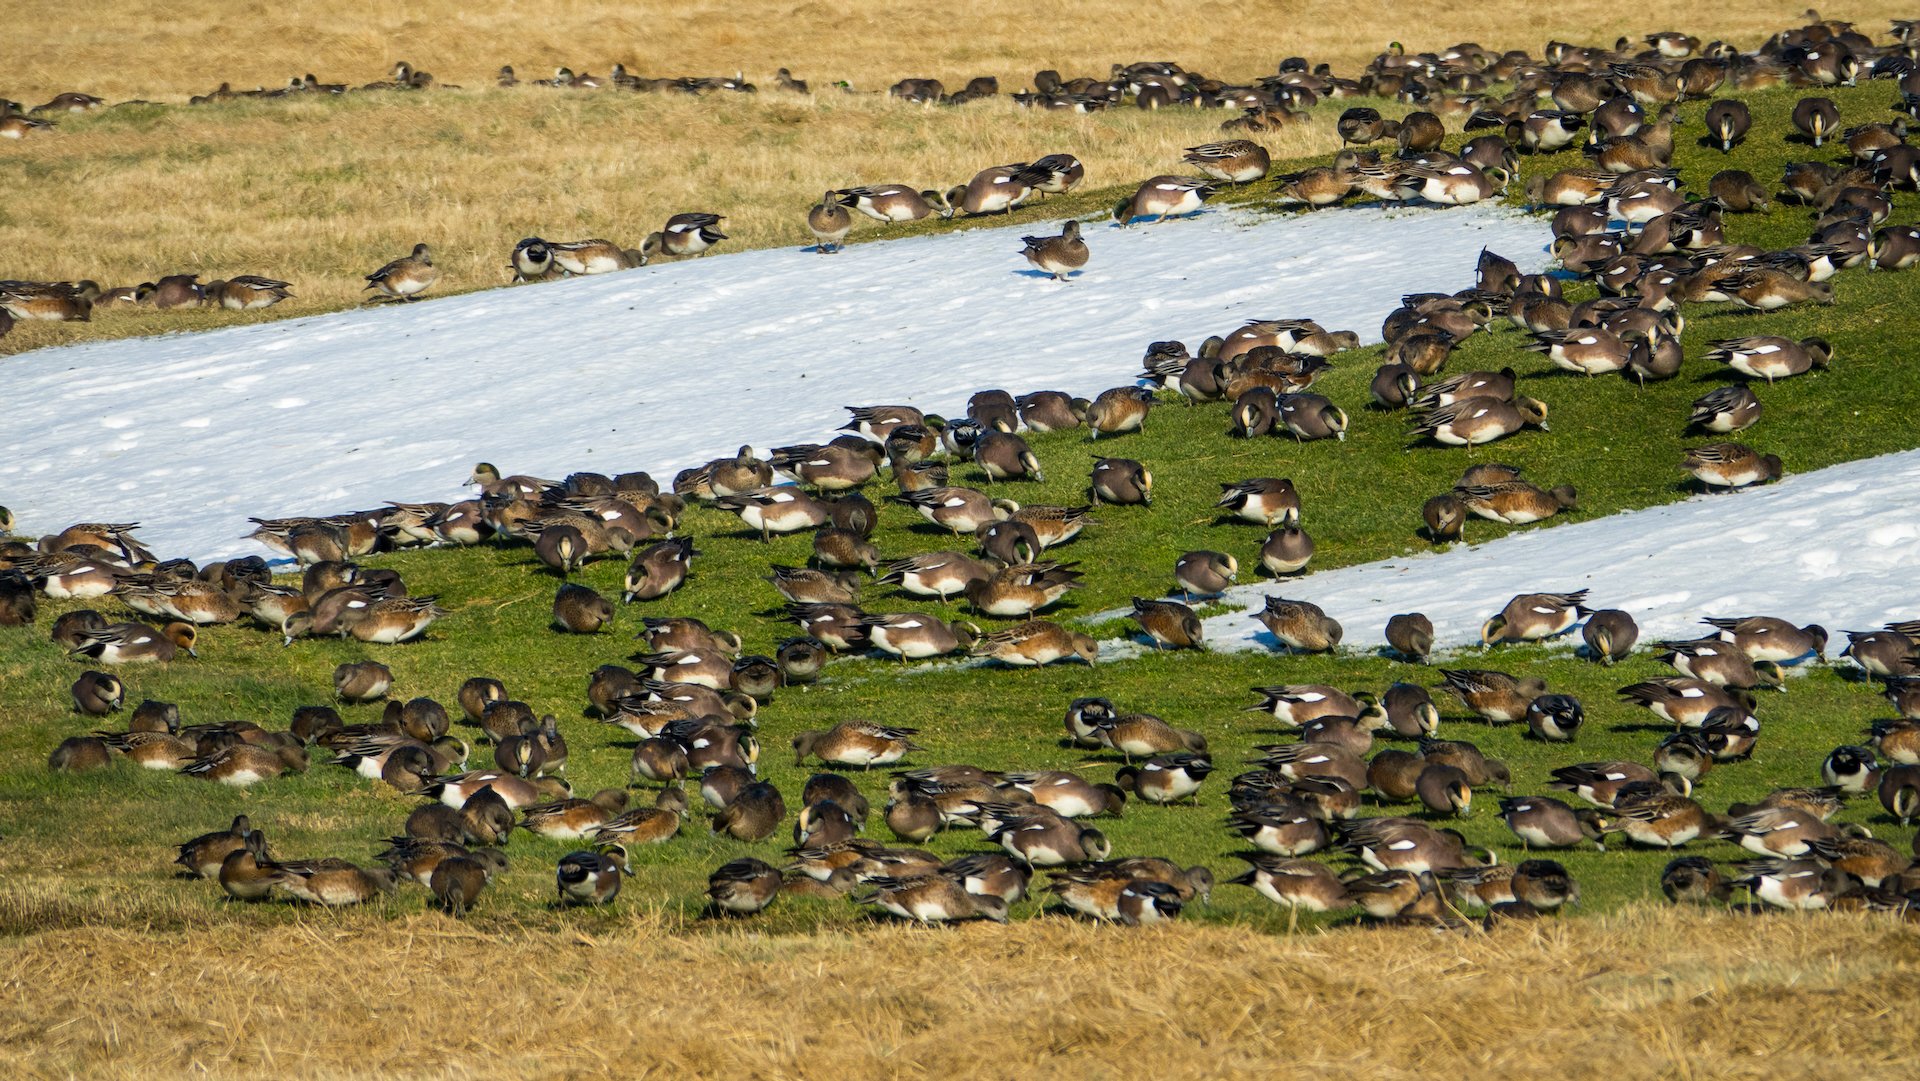  They seemed to be grazing on the still-green grass, among the snow.  